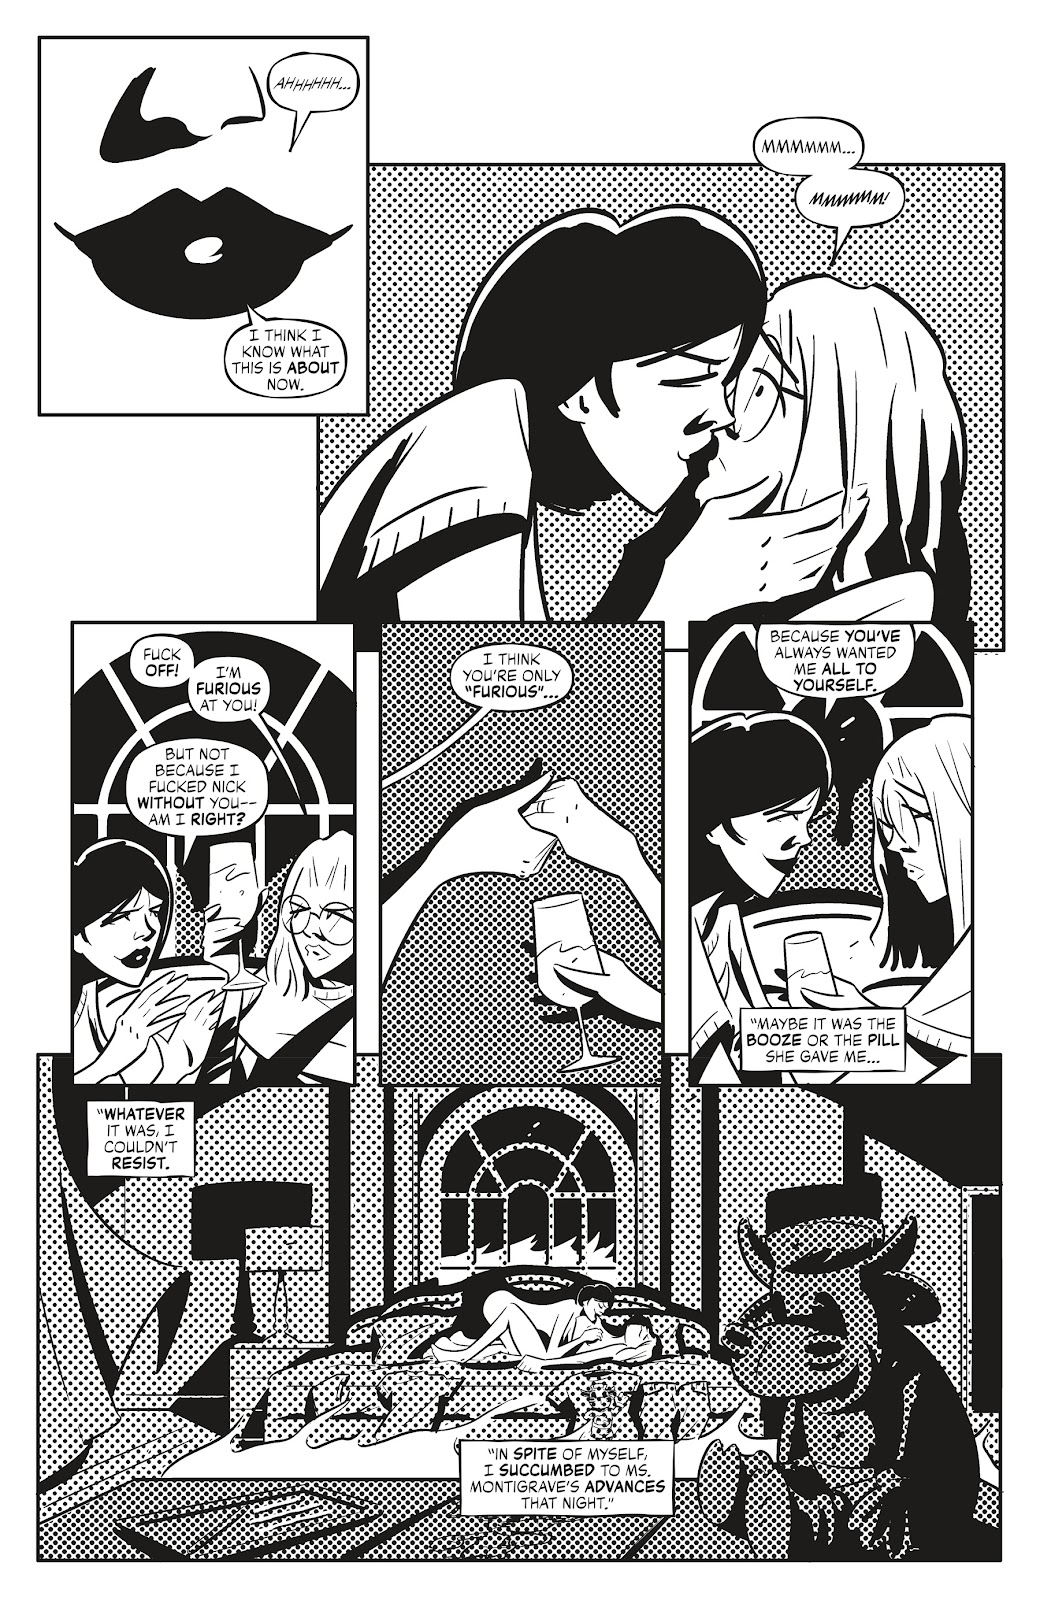 Quick Stops Vol. 2 issue 2 - Page 13